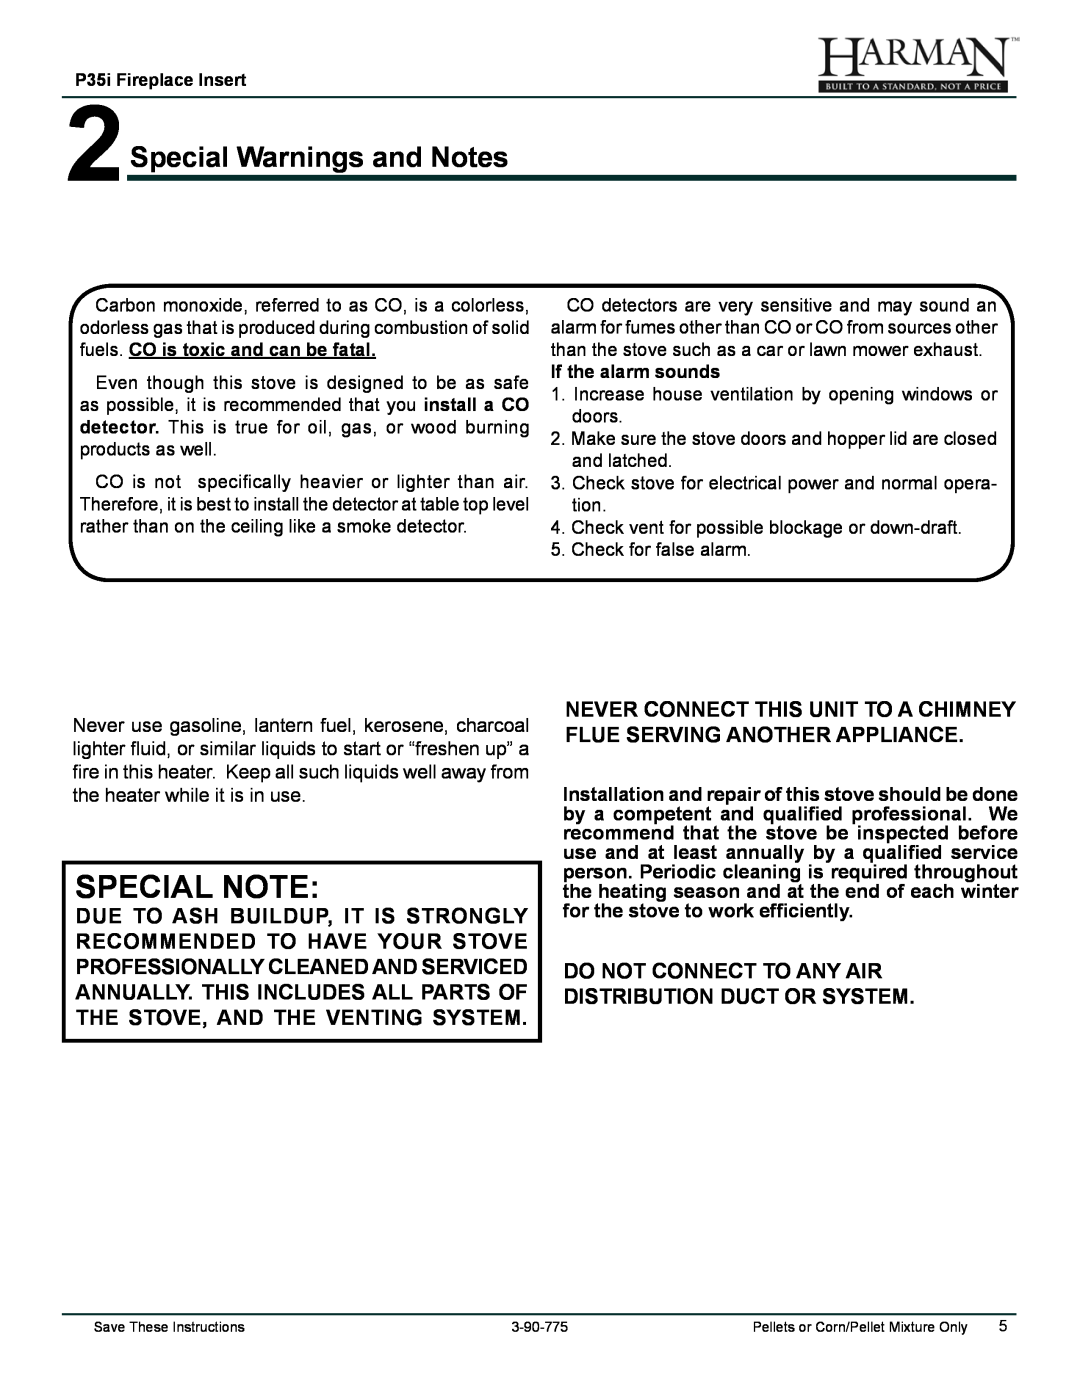 Harman Stove Company P35I owner manual Special Note, 2Special Warnings and Notes 